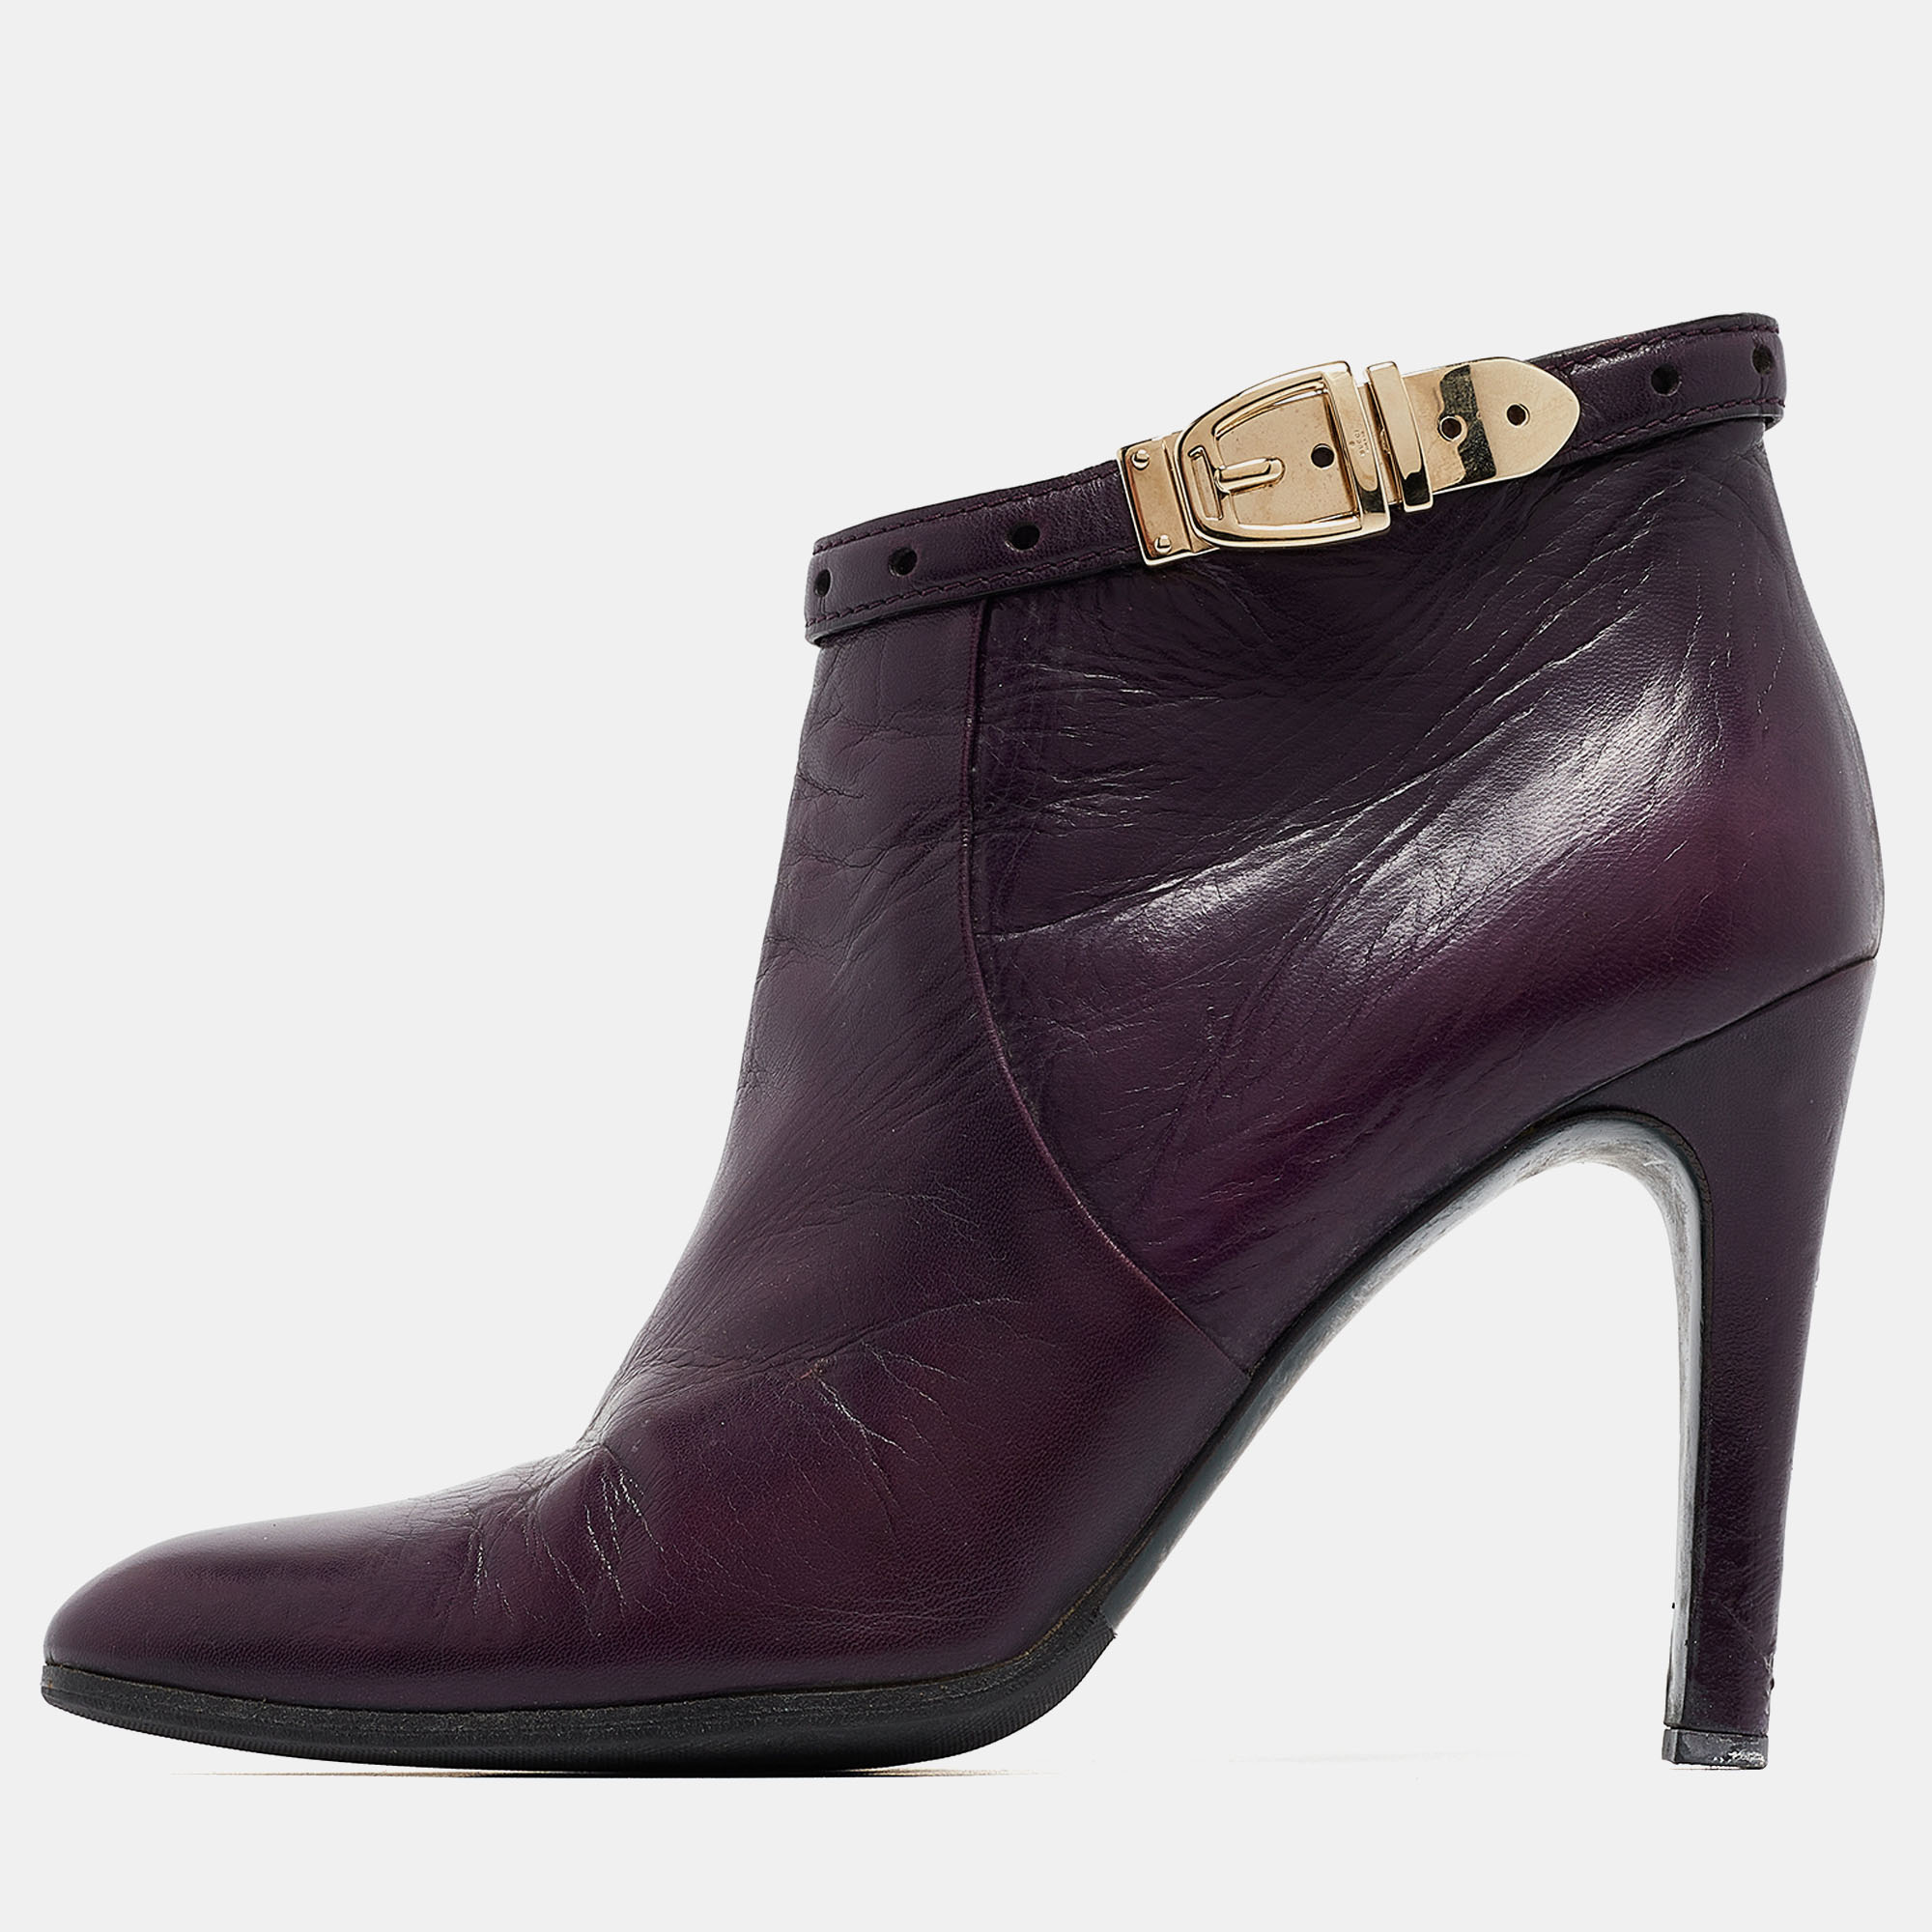 Gucci Purple Leather Buckle Detail Ankle Booties Size 37.5